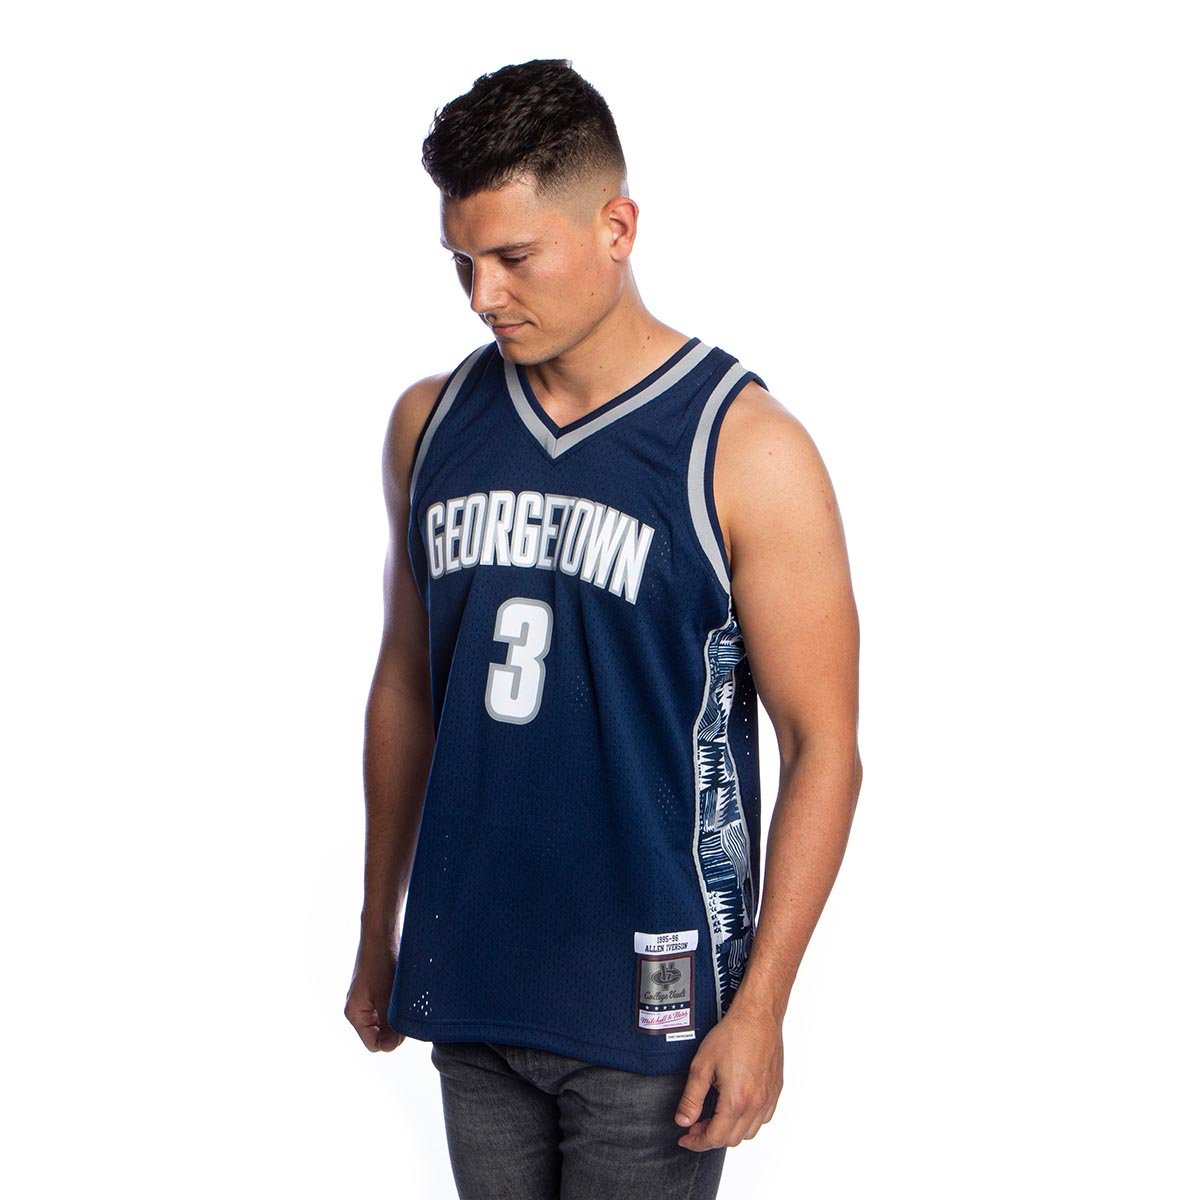 Allen Iverson Georgetown Hoyas Mitchell & Ness Swingman Jersey Youth Large  NWT